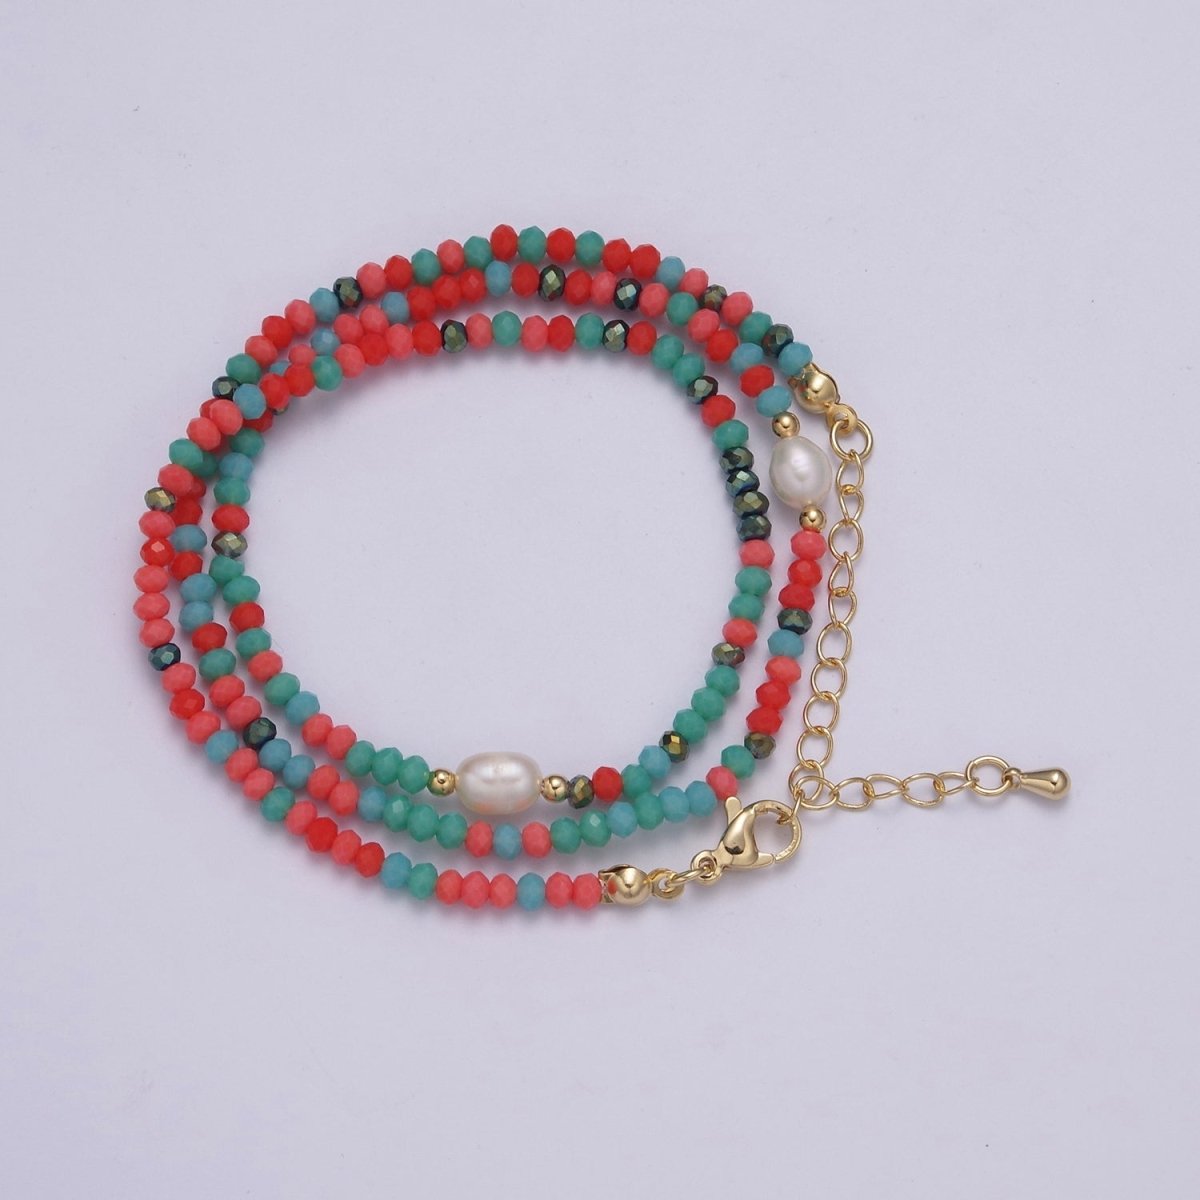 Gorgeous colorful red, green Glass bead w/ Pearl gold chain necklace for Christmas Holiday Season | WA-448 Clearance Pricing - DLUXCA